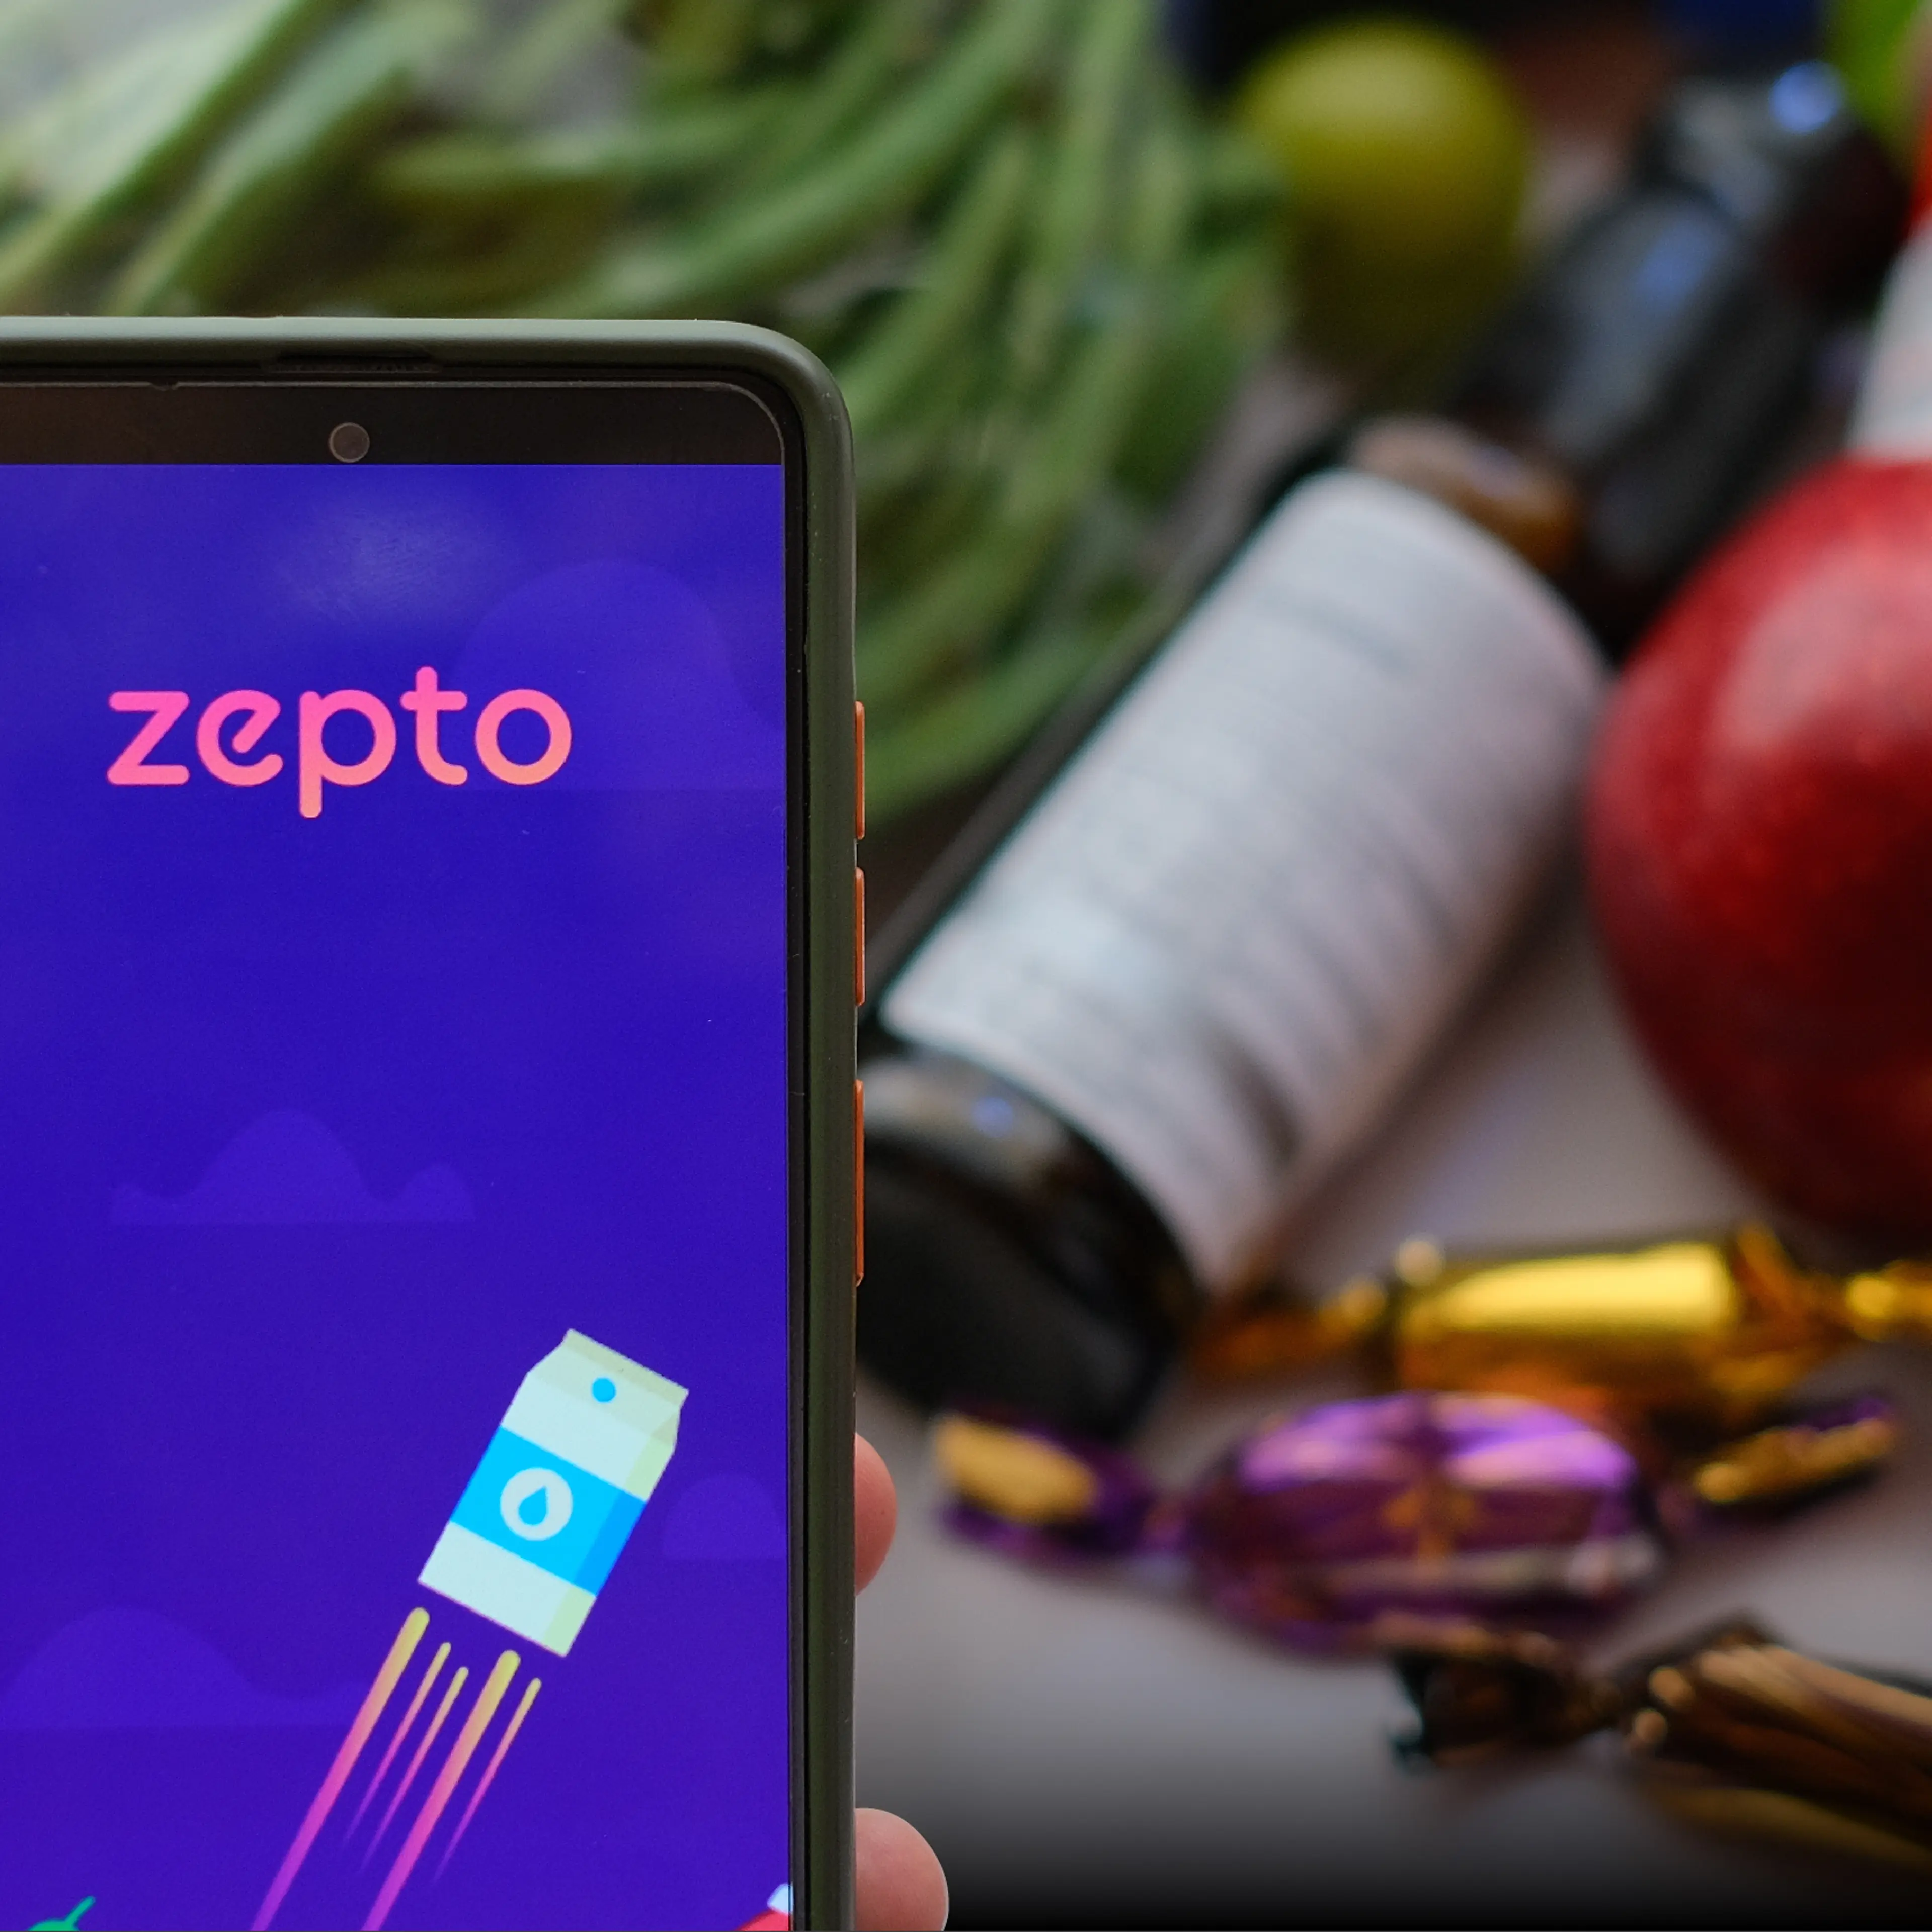 Zepto in talks for another fundraise at a valuation of $4.6B: Report